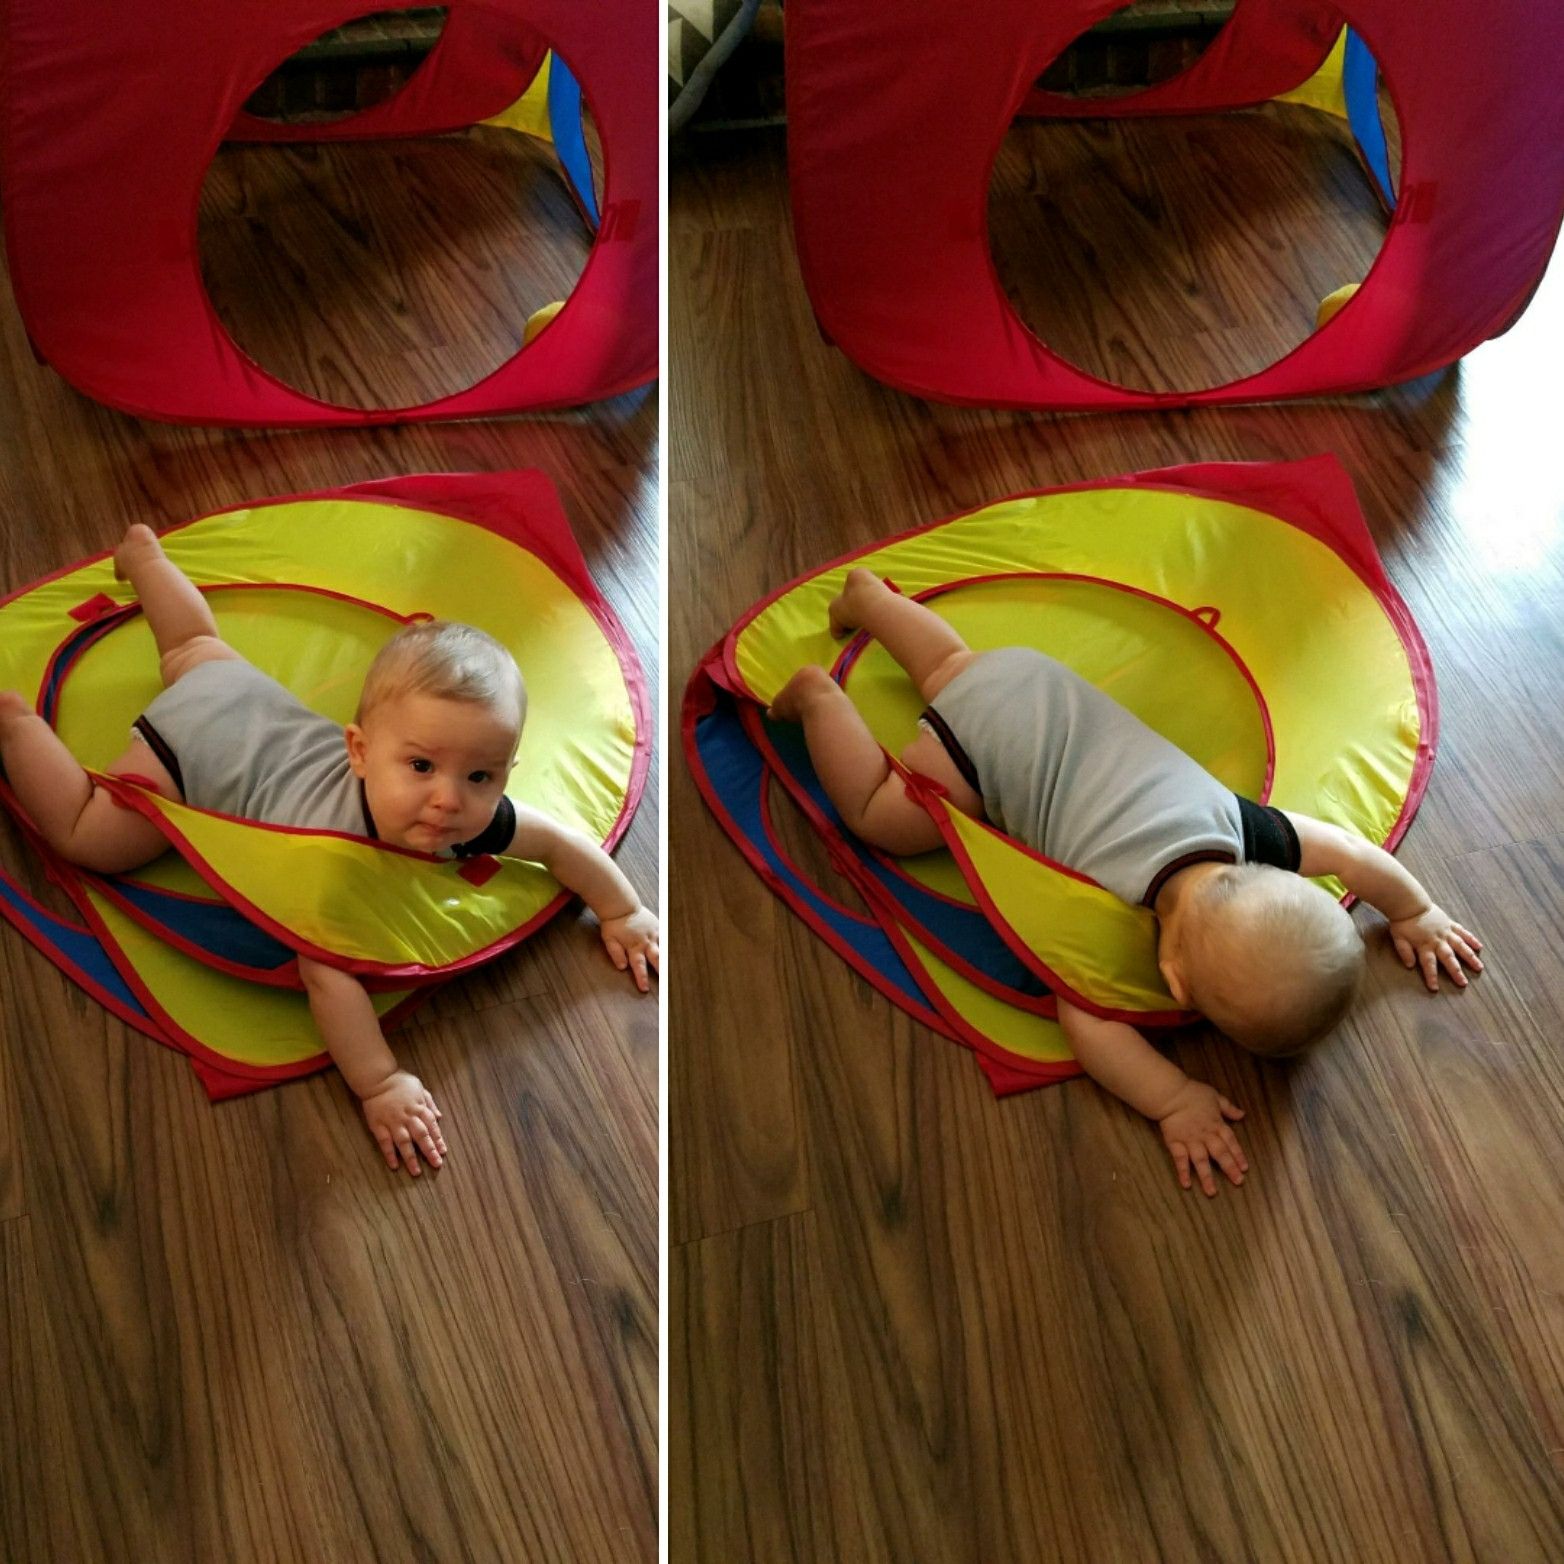 Our kid got stuck in his pop up tent and basically gave up on life